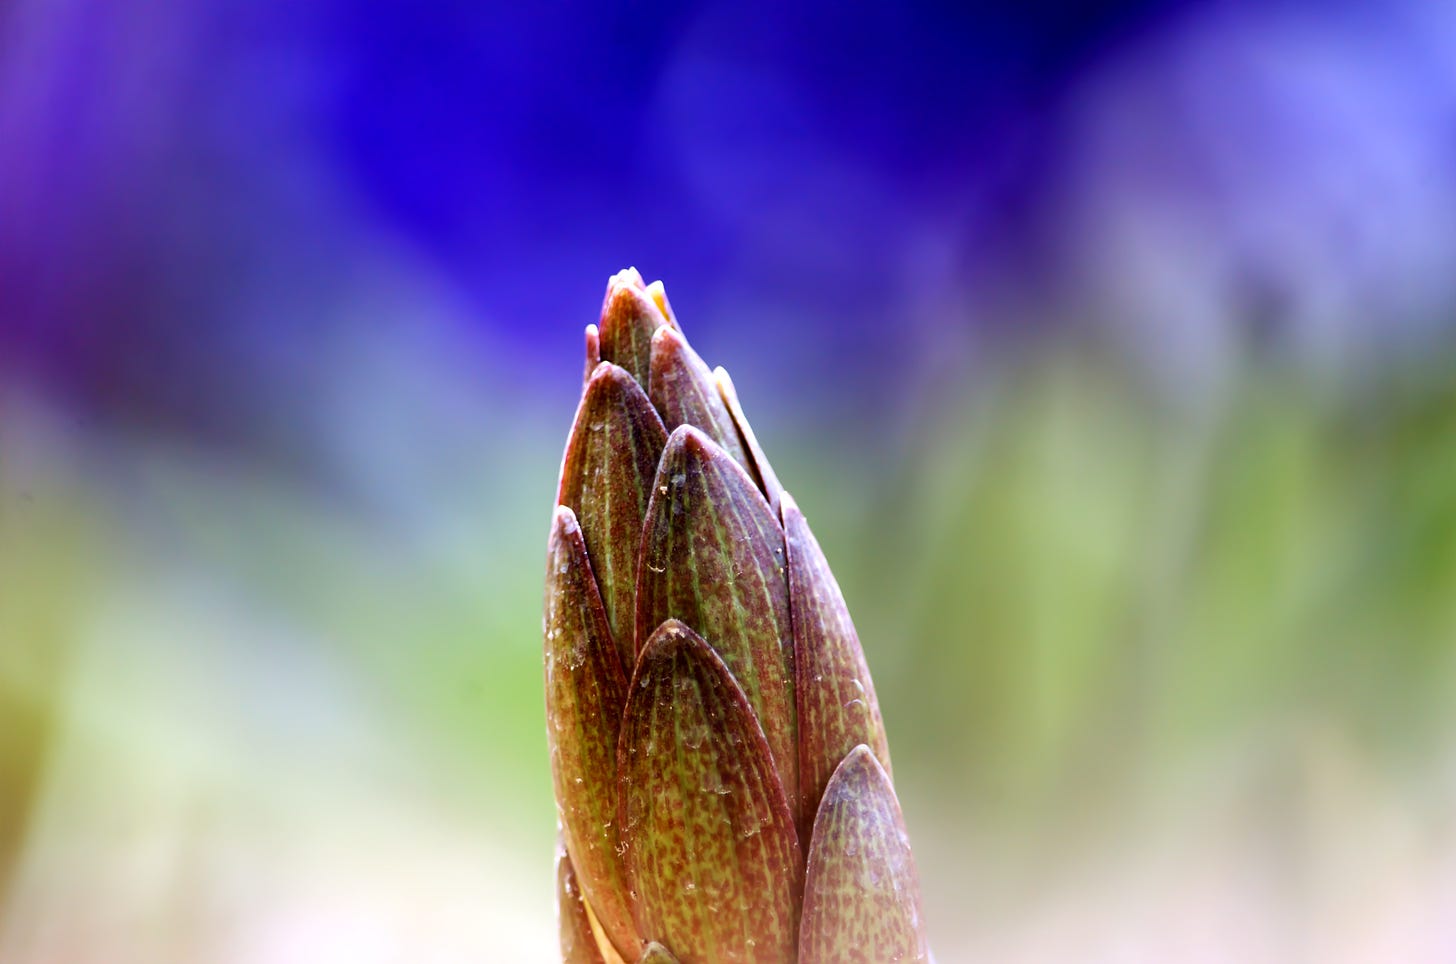 A macro image details a Stargazer Lilly bud against a hazy garden background in blues and greens.